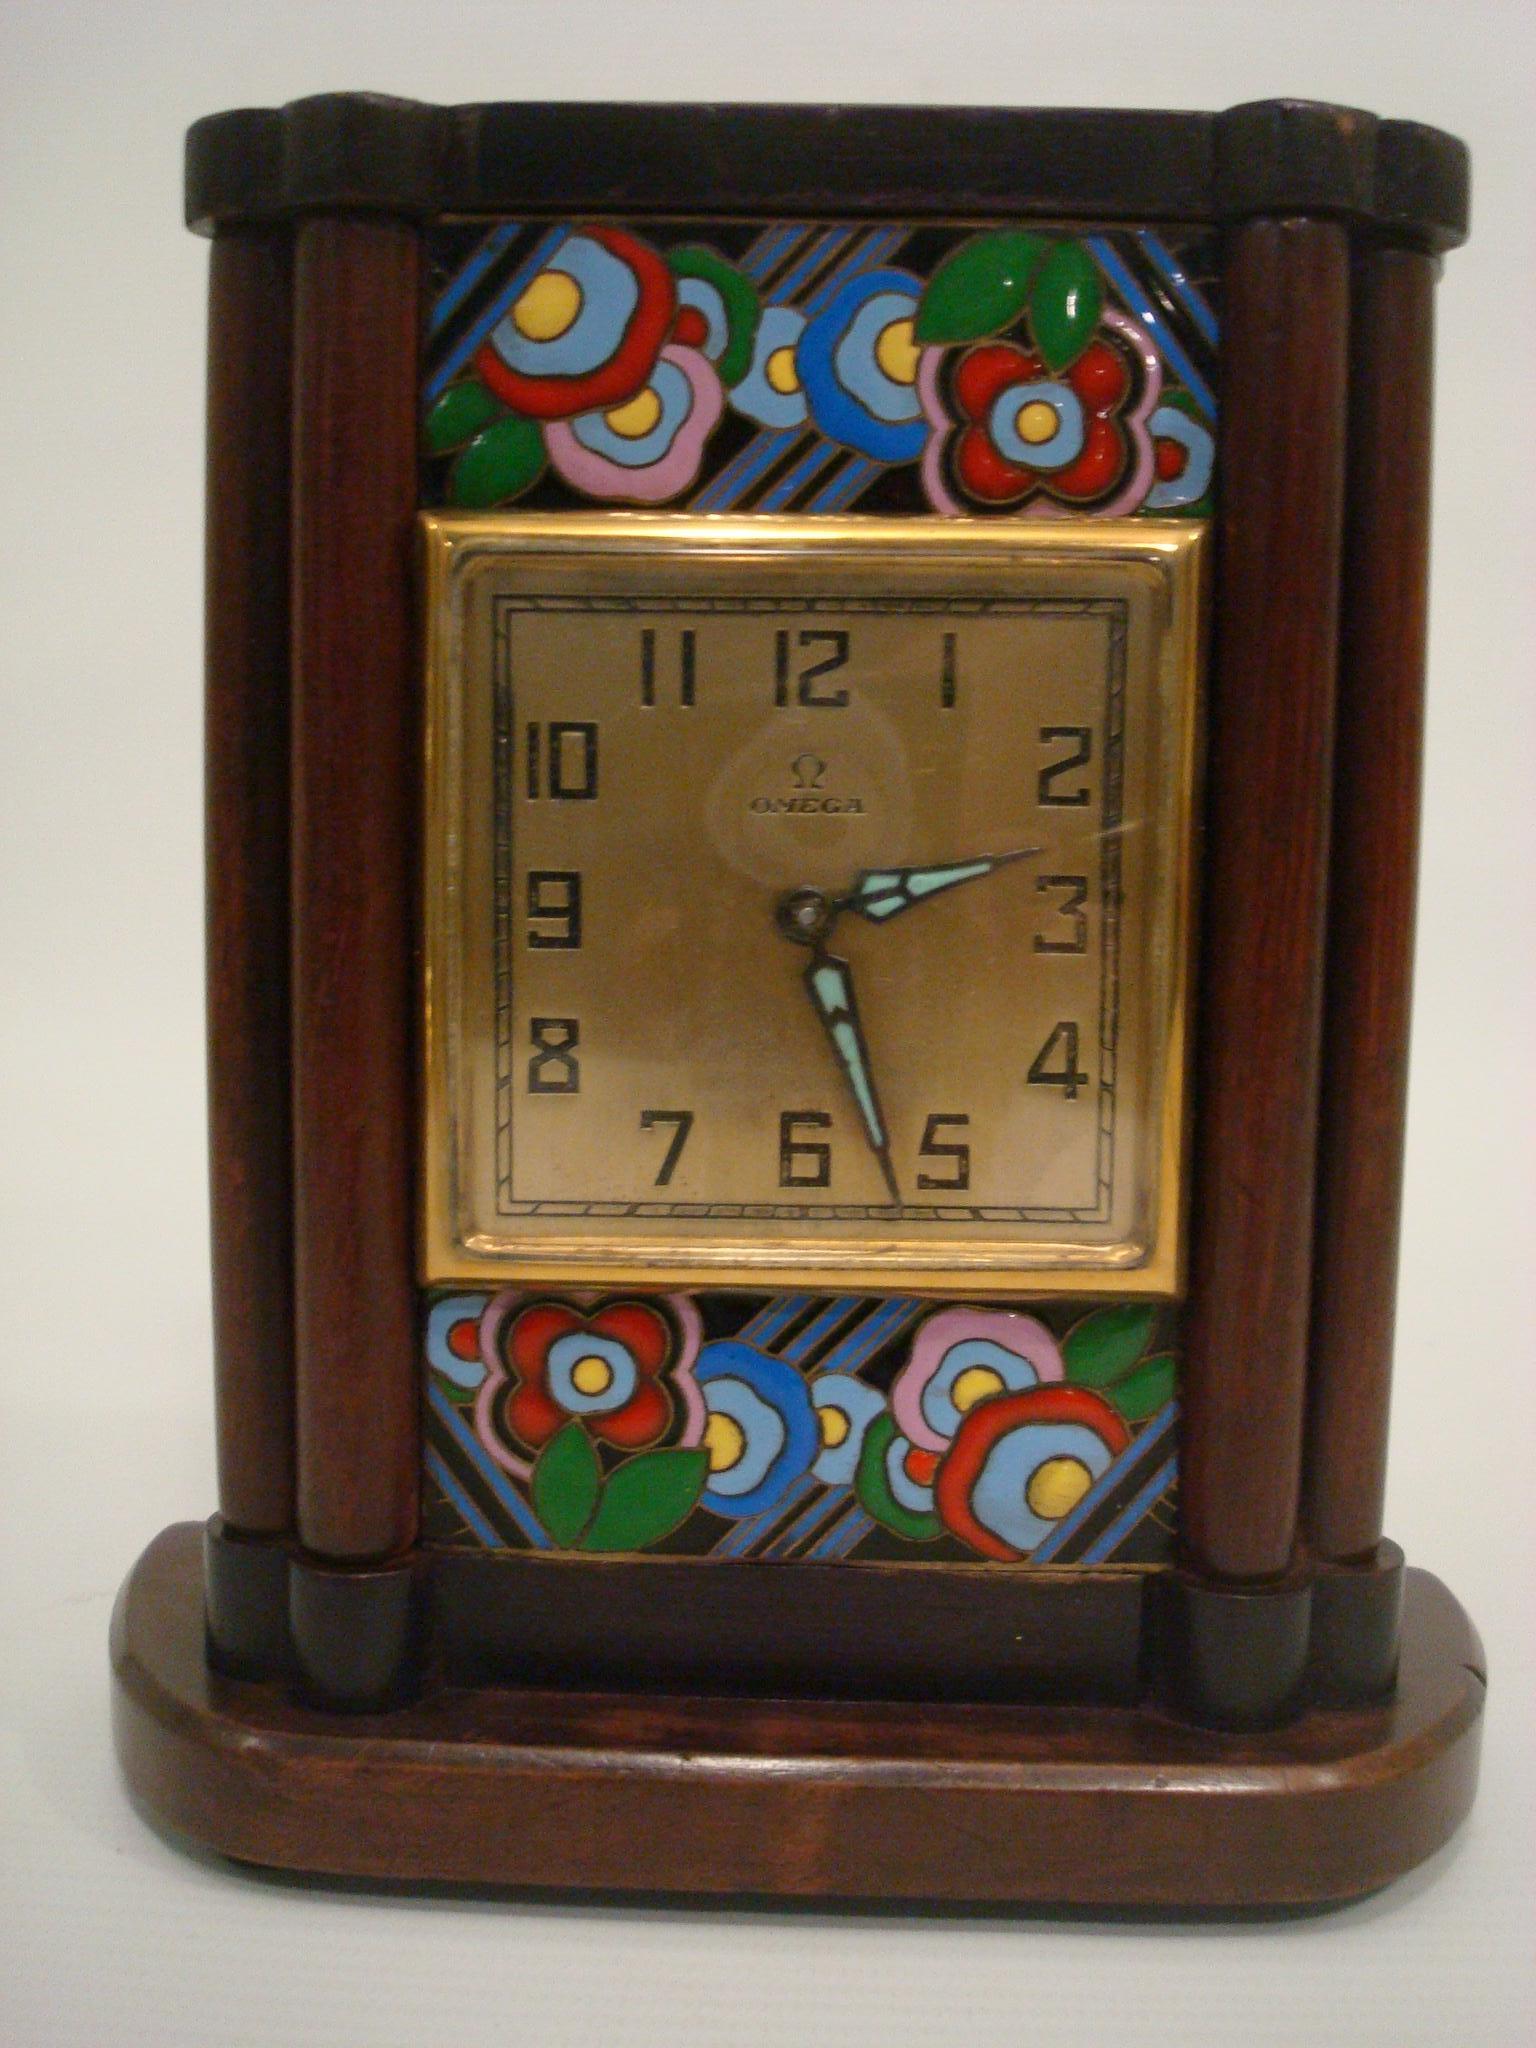 Omega. A wood and enamel Art Deco eight day desk clock
Singed Omega.
Polished wooden case, two polychrome enamel panels with floral and geometric motif, gilt case back, dial signed.
Very good conditions.
Working conditions. It just been